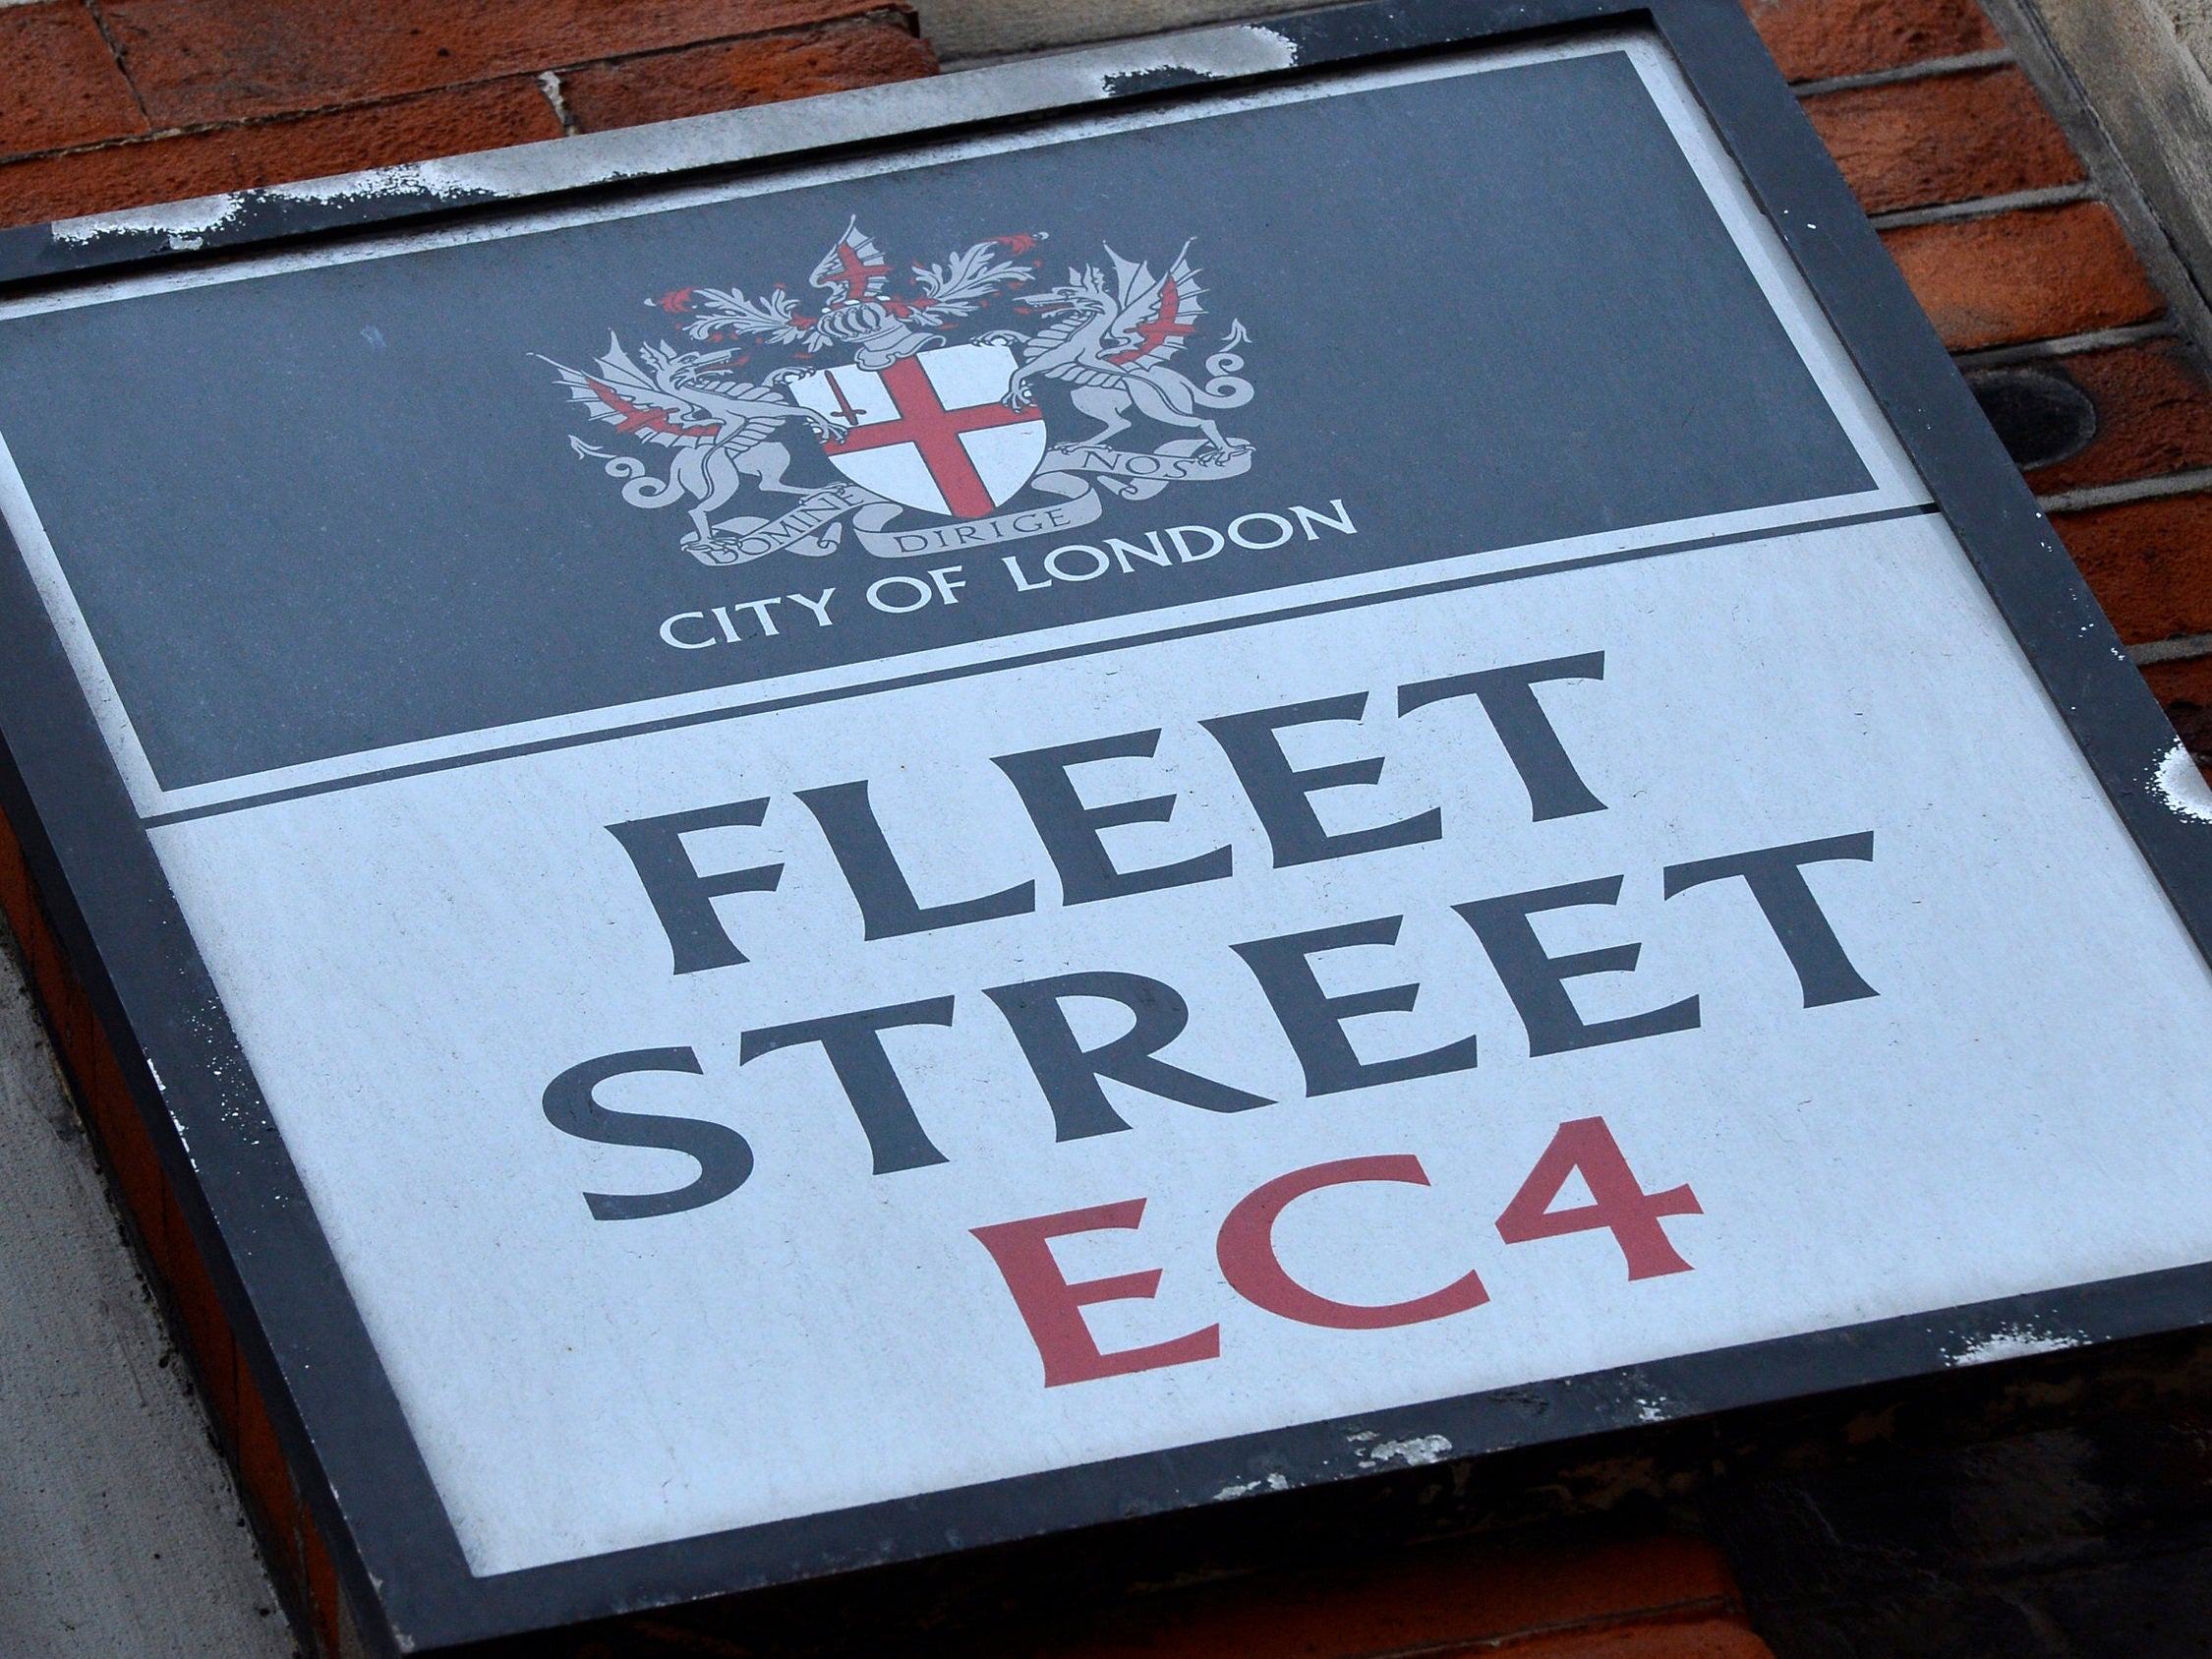 The day the Fleet Street lunch died